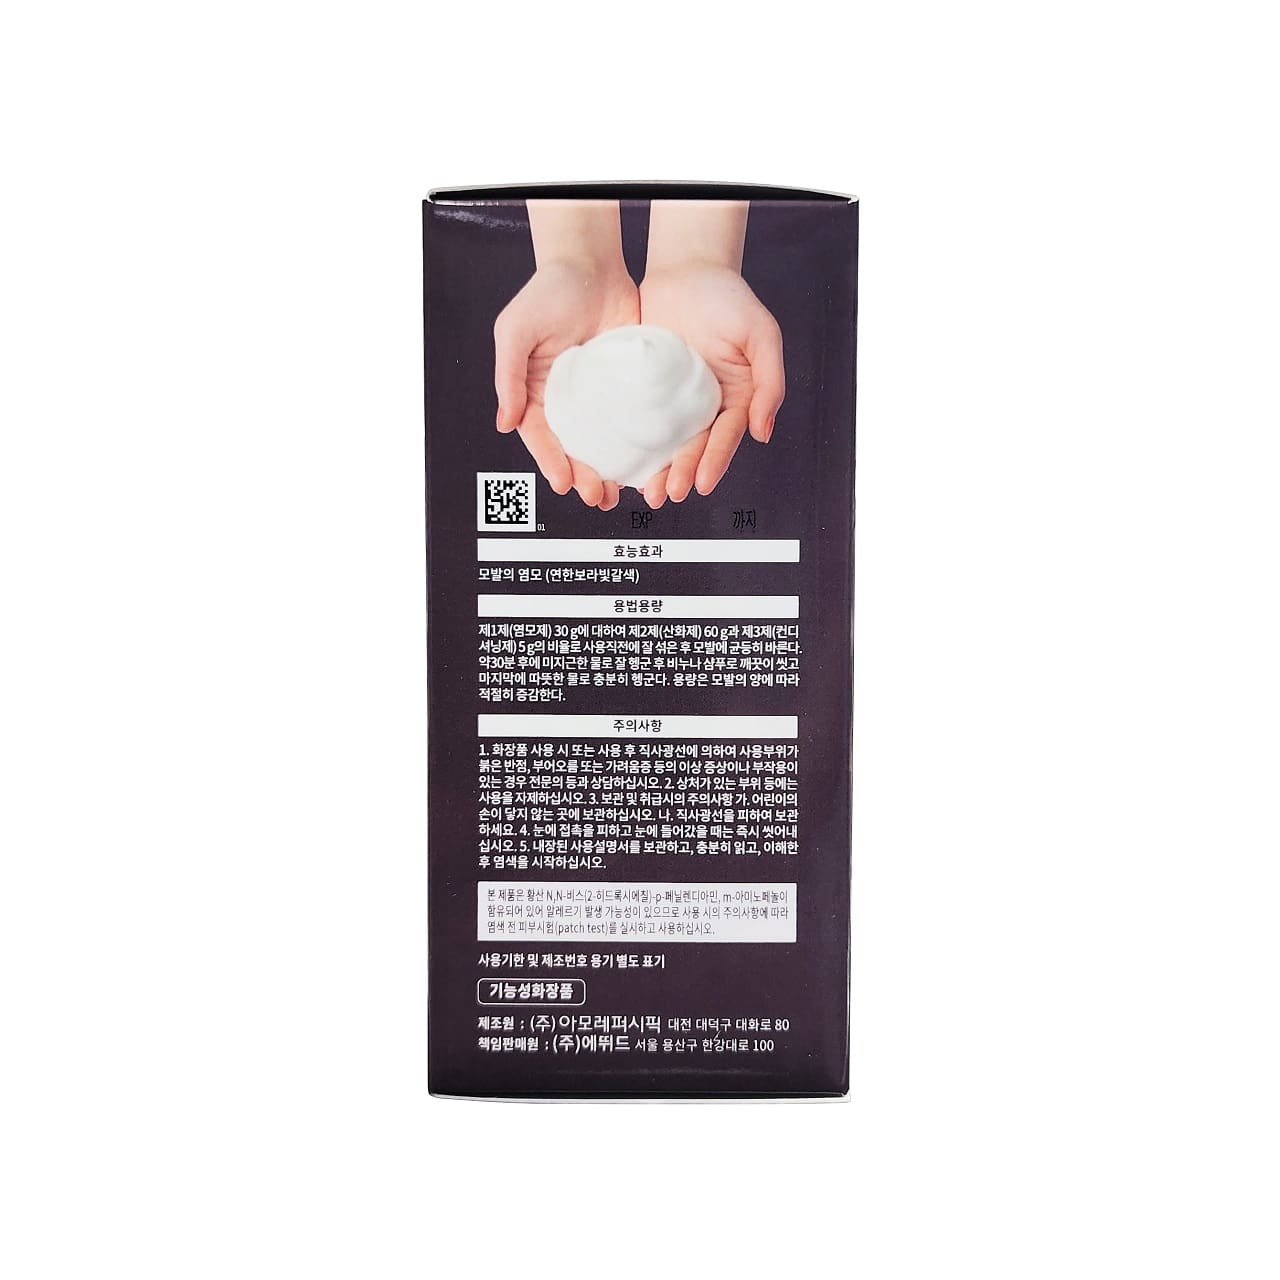 Direections for Etude House Hot Style Bubble Hair Coloring (10PP Ash Violet) in Korean